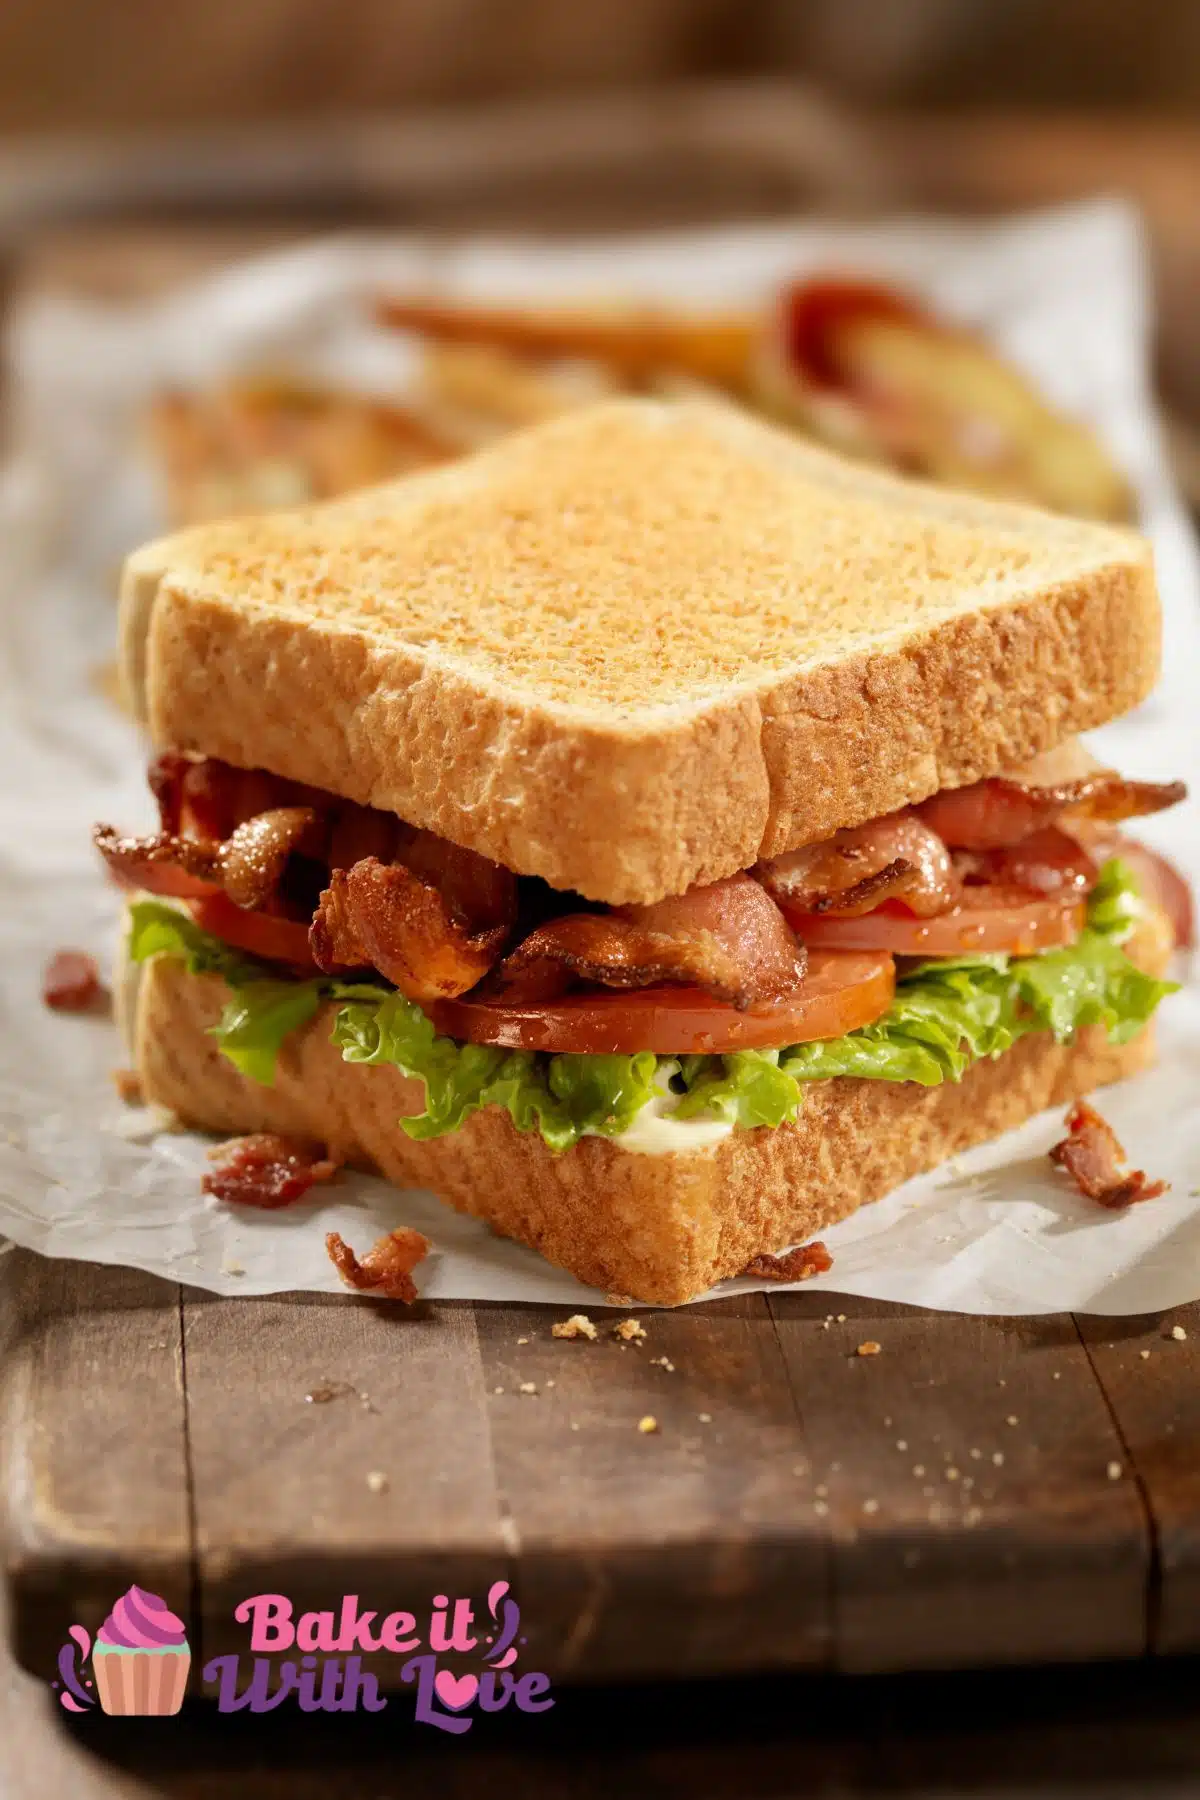 Tall image showing a classic BLT sandwich.